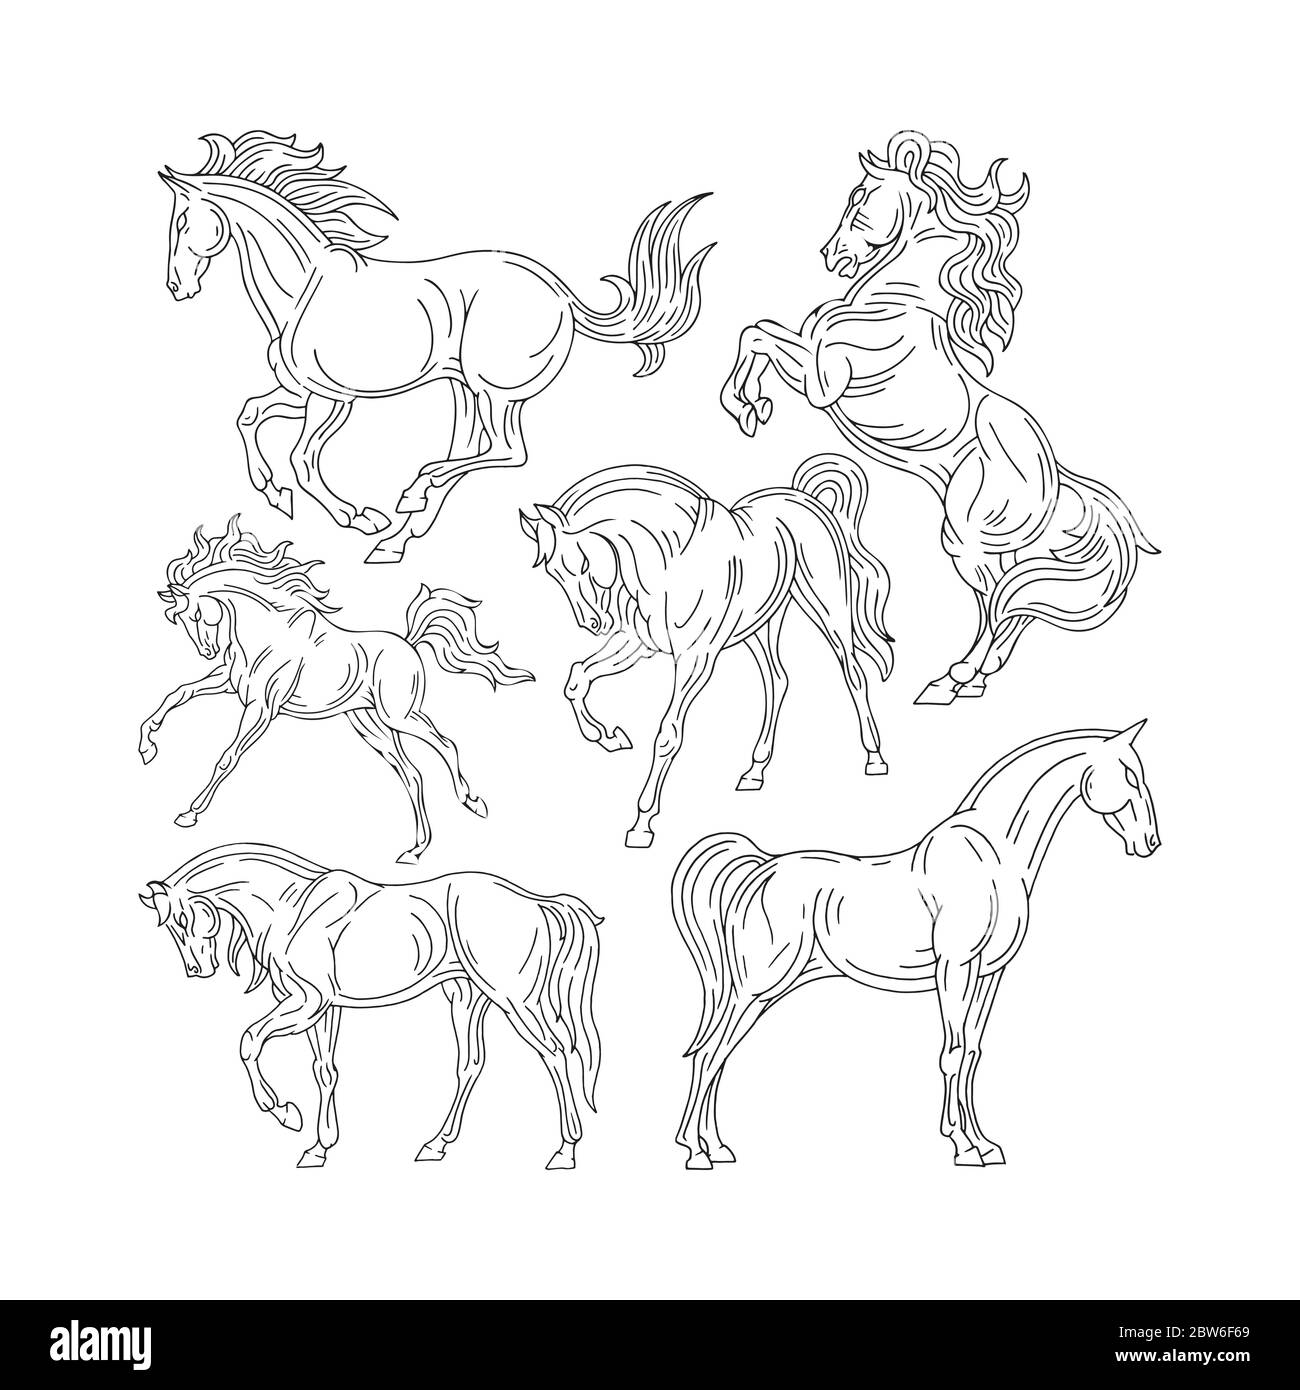 Some doodles and sketches I did of horses. These... - Courtney's Concepts